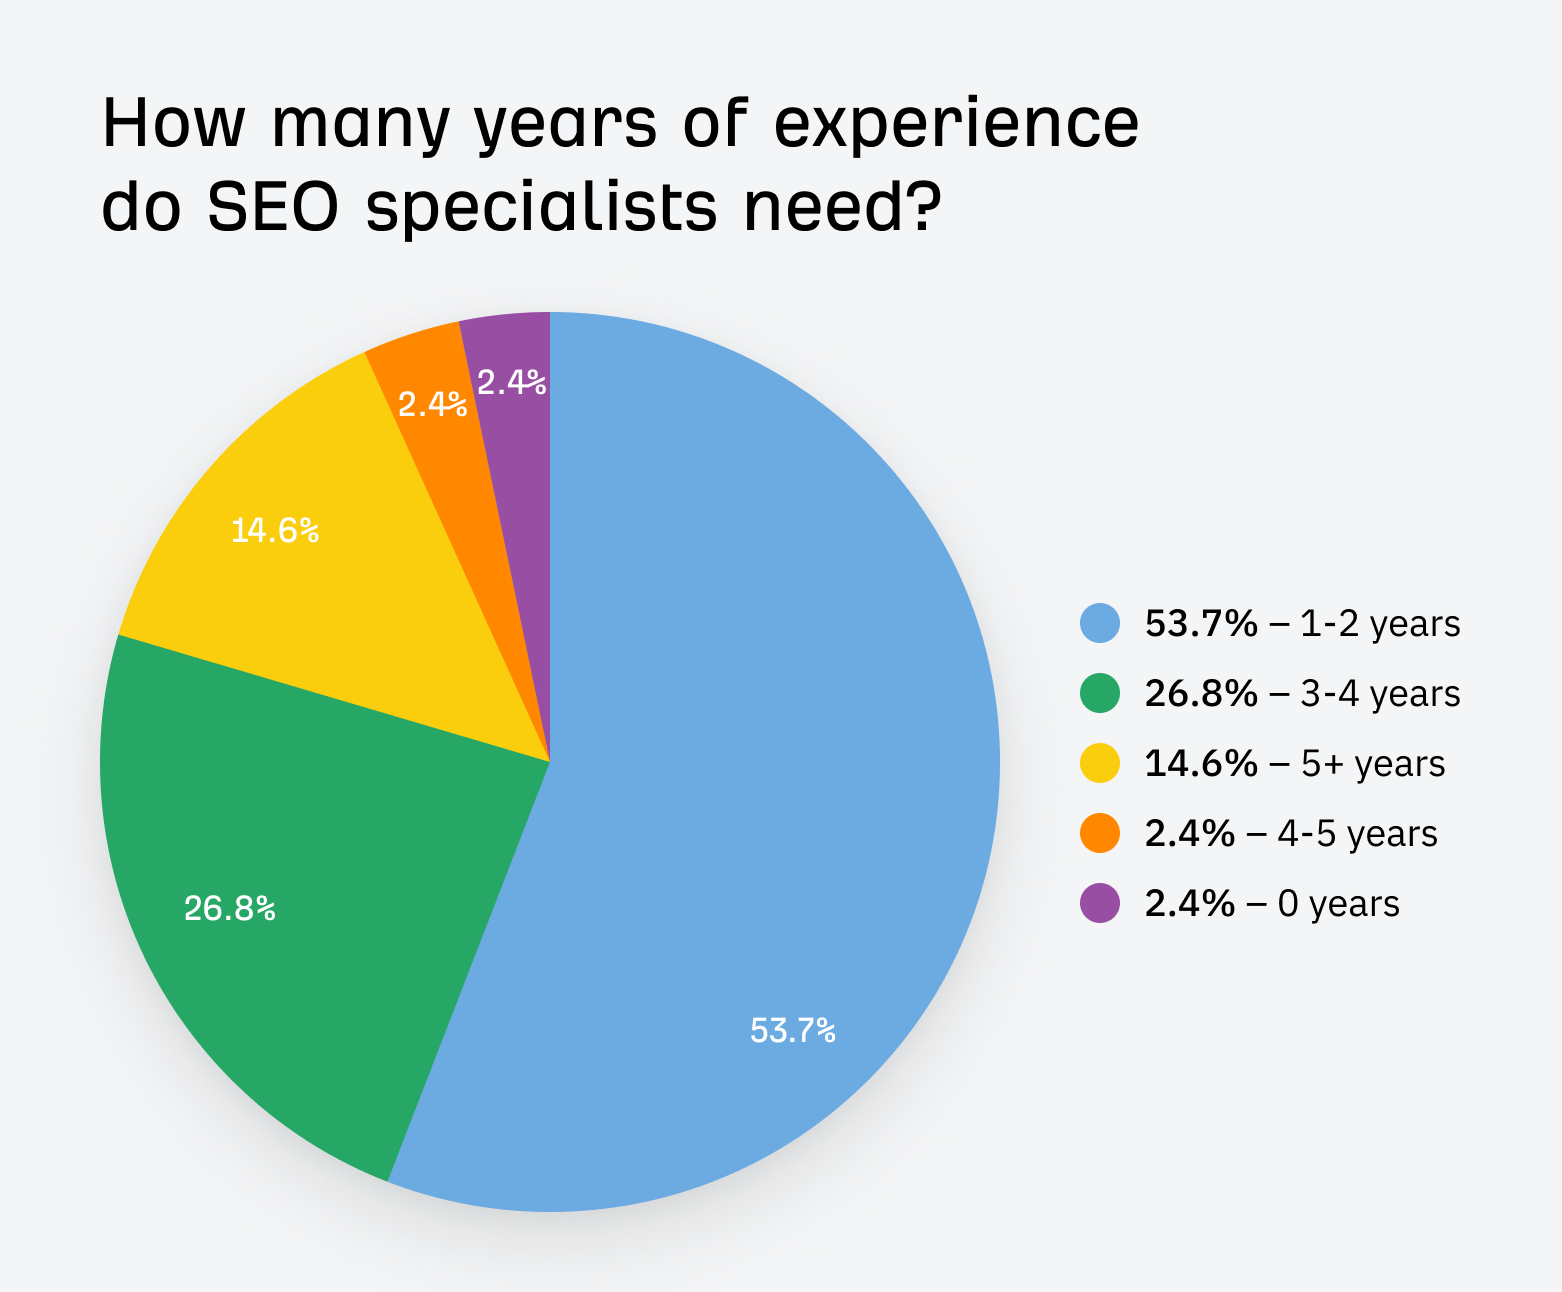 Chart showing how many years of experience SEO specialists need